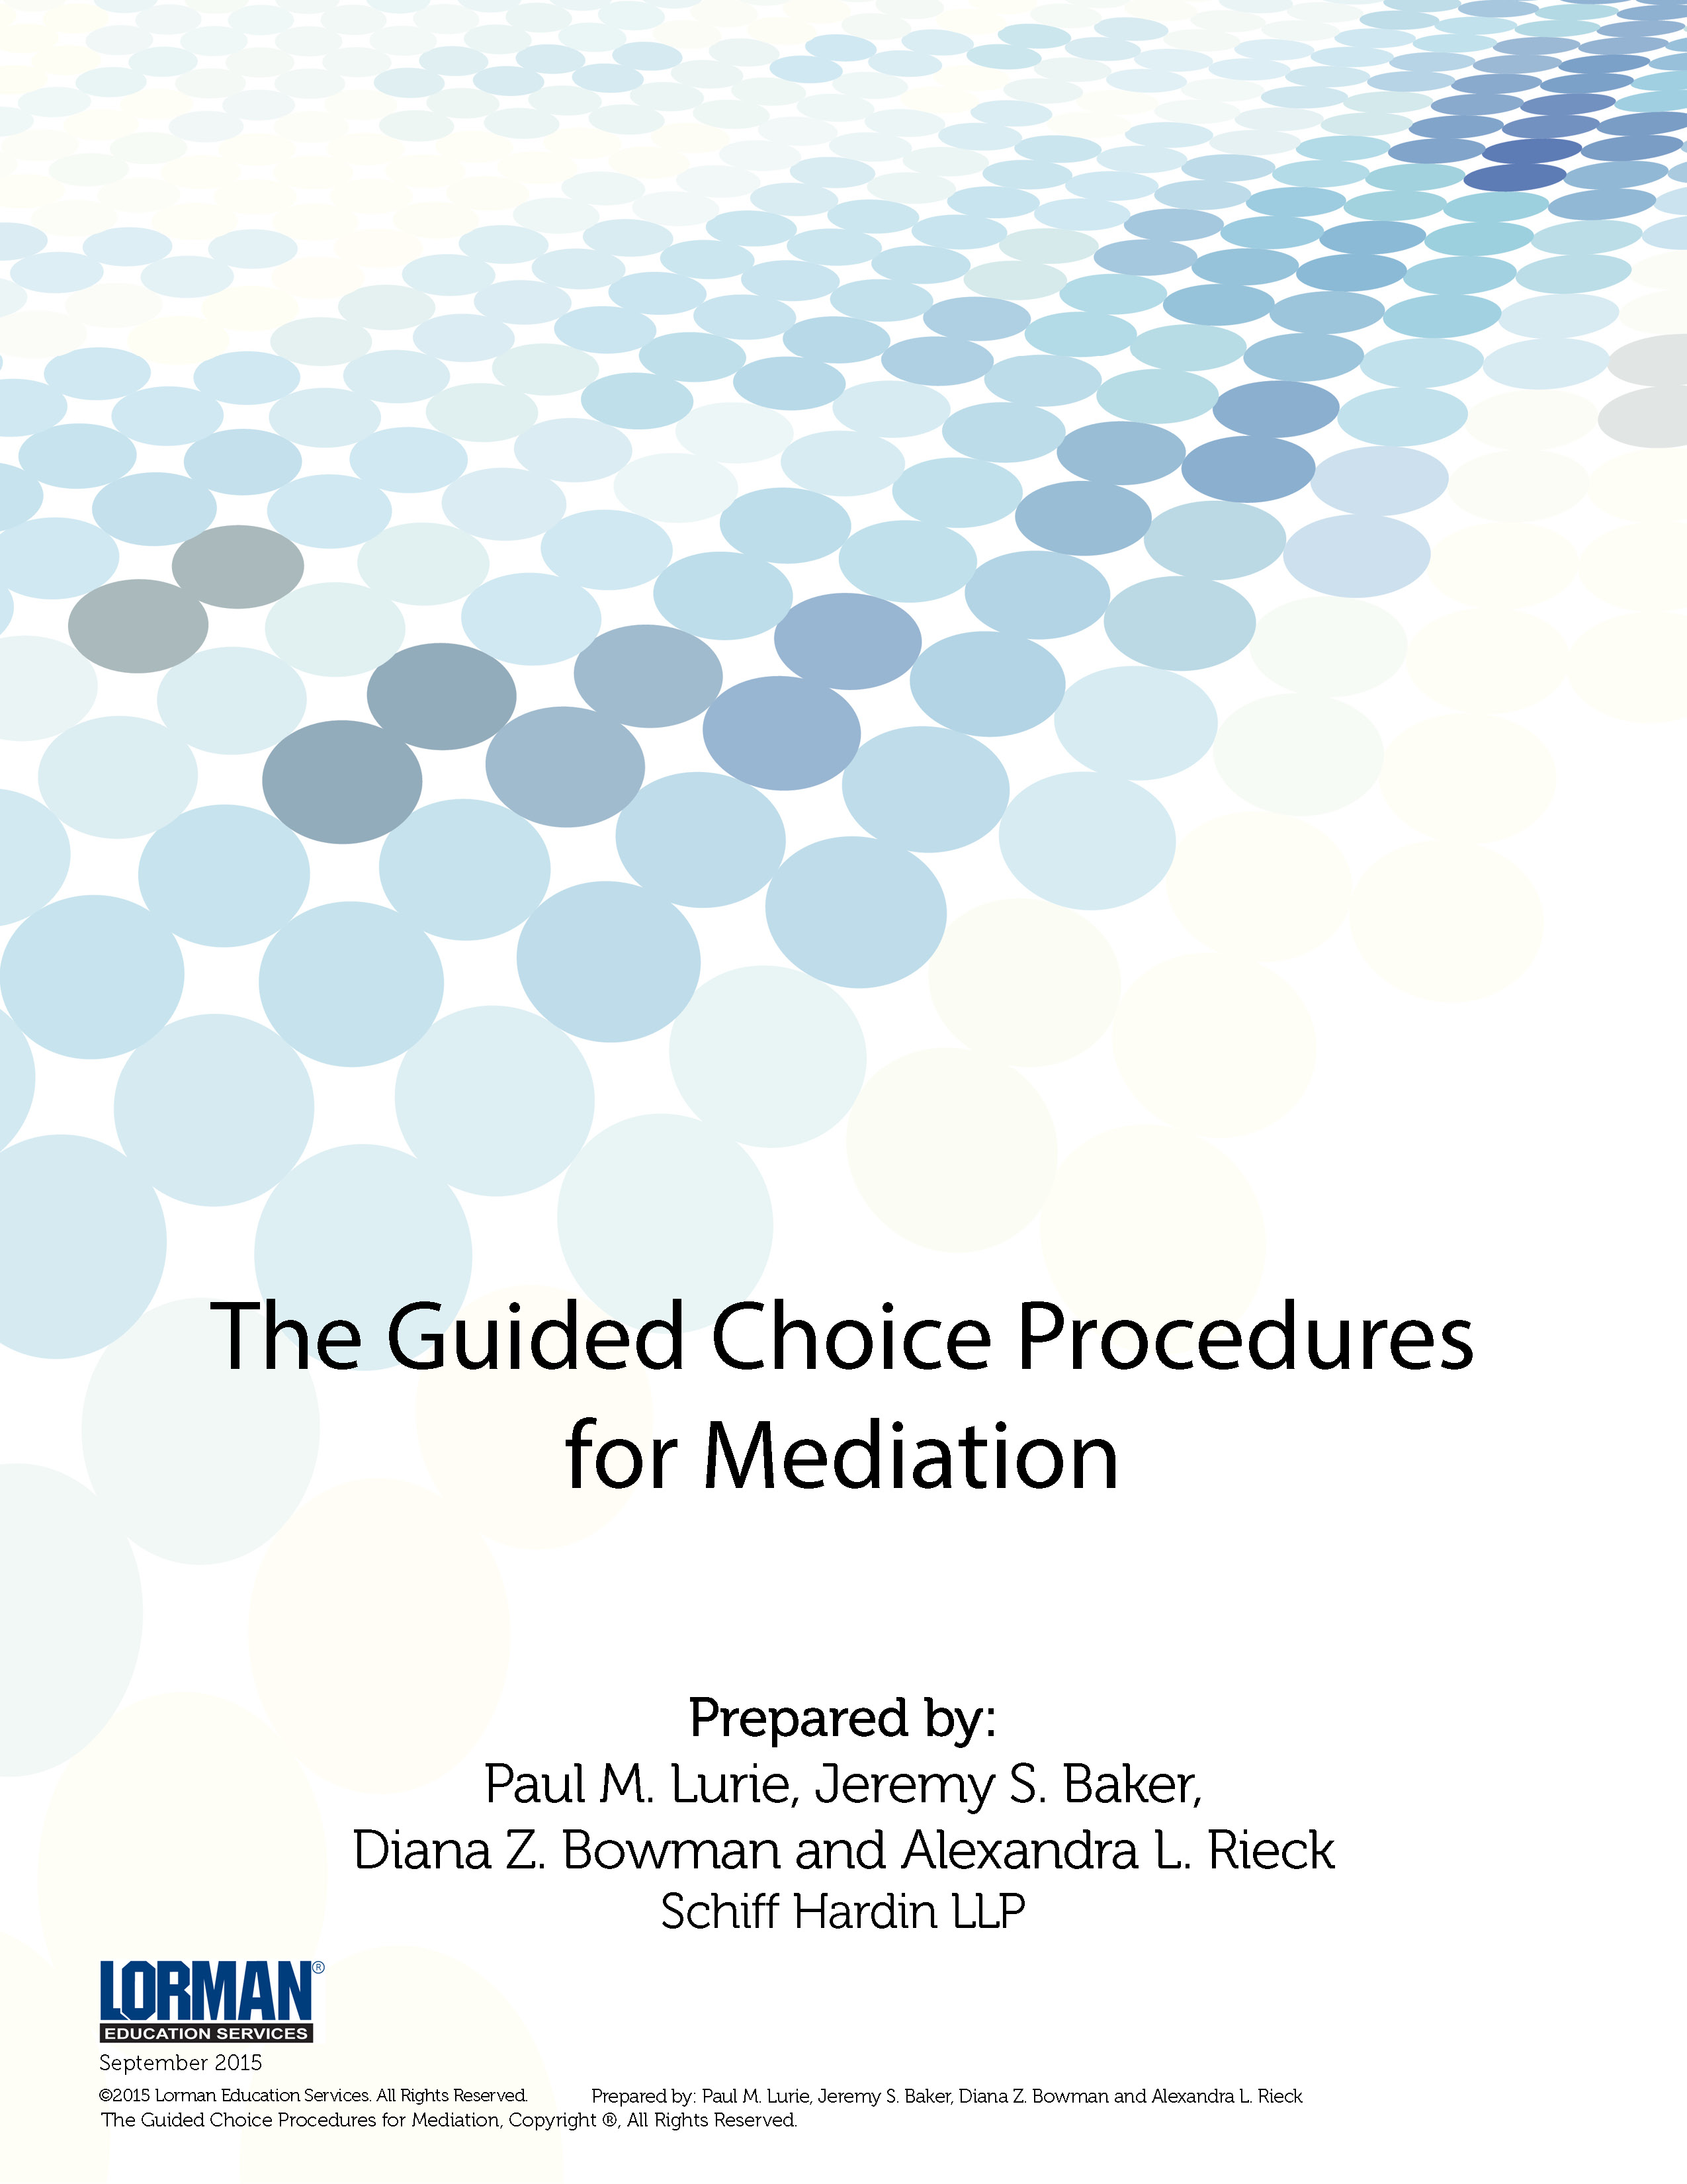 The Guided Choice Procedures for Mediation